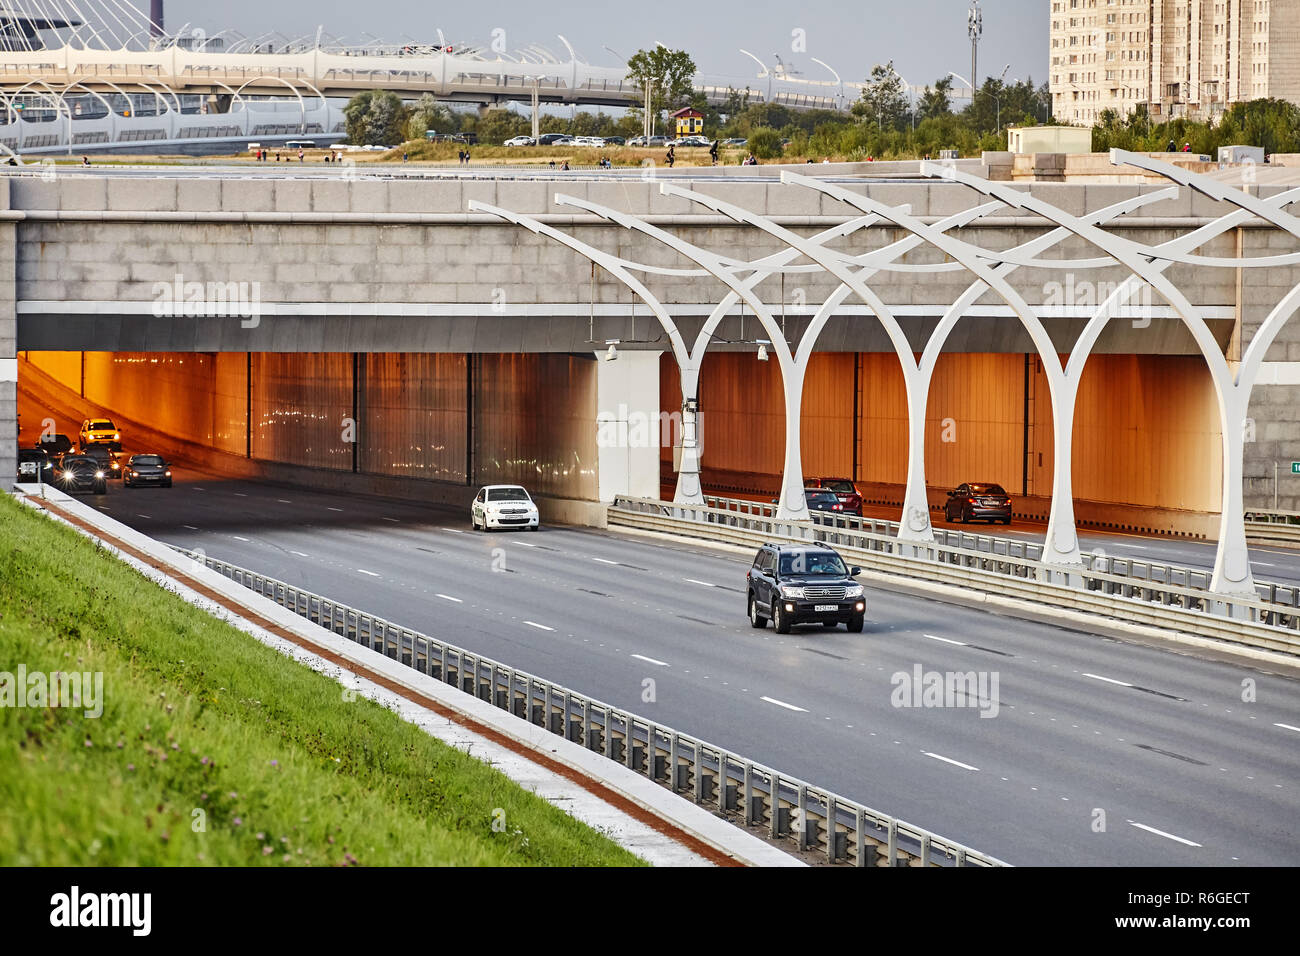 St. Petersburg, Russia - August 24, 2018: Cars leave the tunnel on the freeway with road safety barrier, Saint Petersburg. Stock Photo